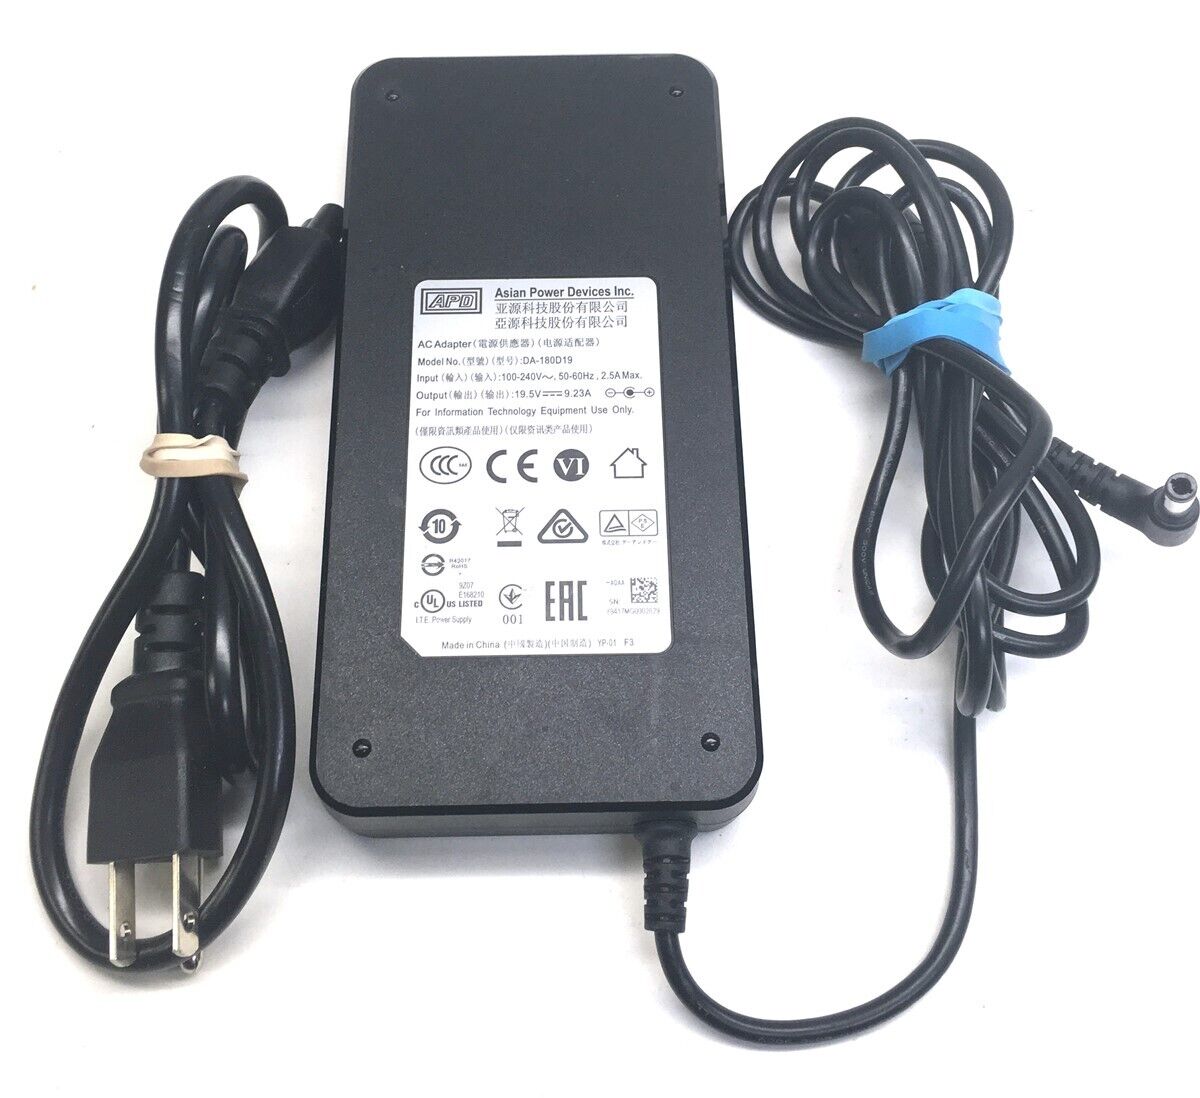 APD AC Adapter Power Supply for Clevo Sager Laptop DA-180D19 19.5V 9.23A 180W Brand: ApD Type: Power Supply Compatib - Click Image to Close